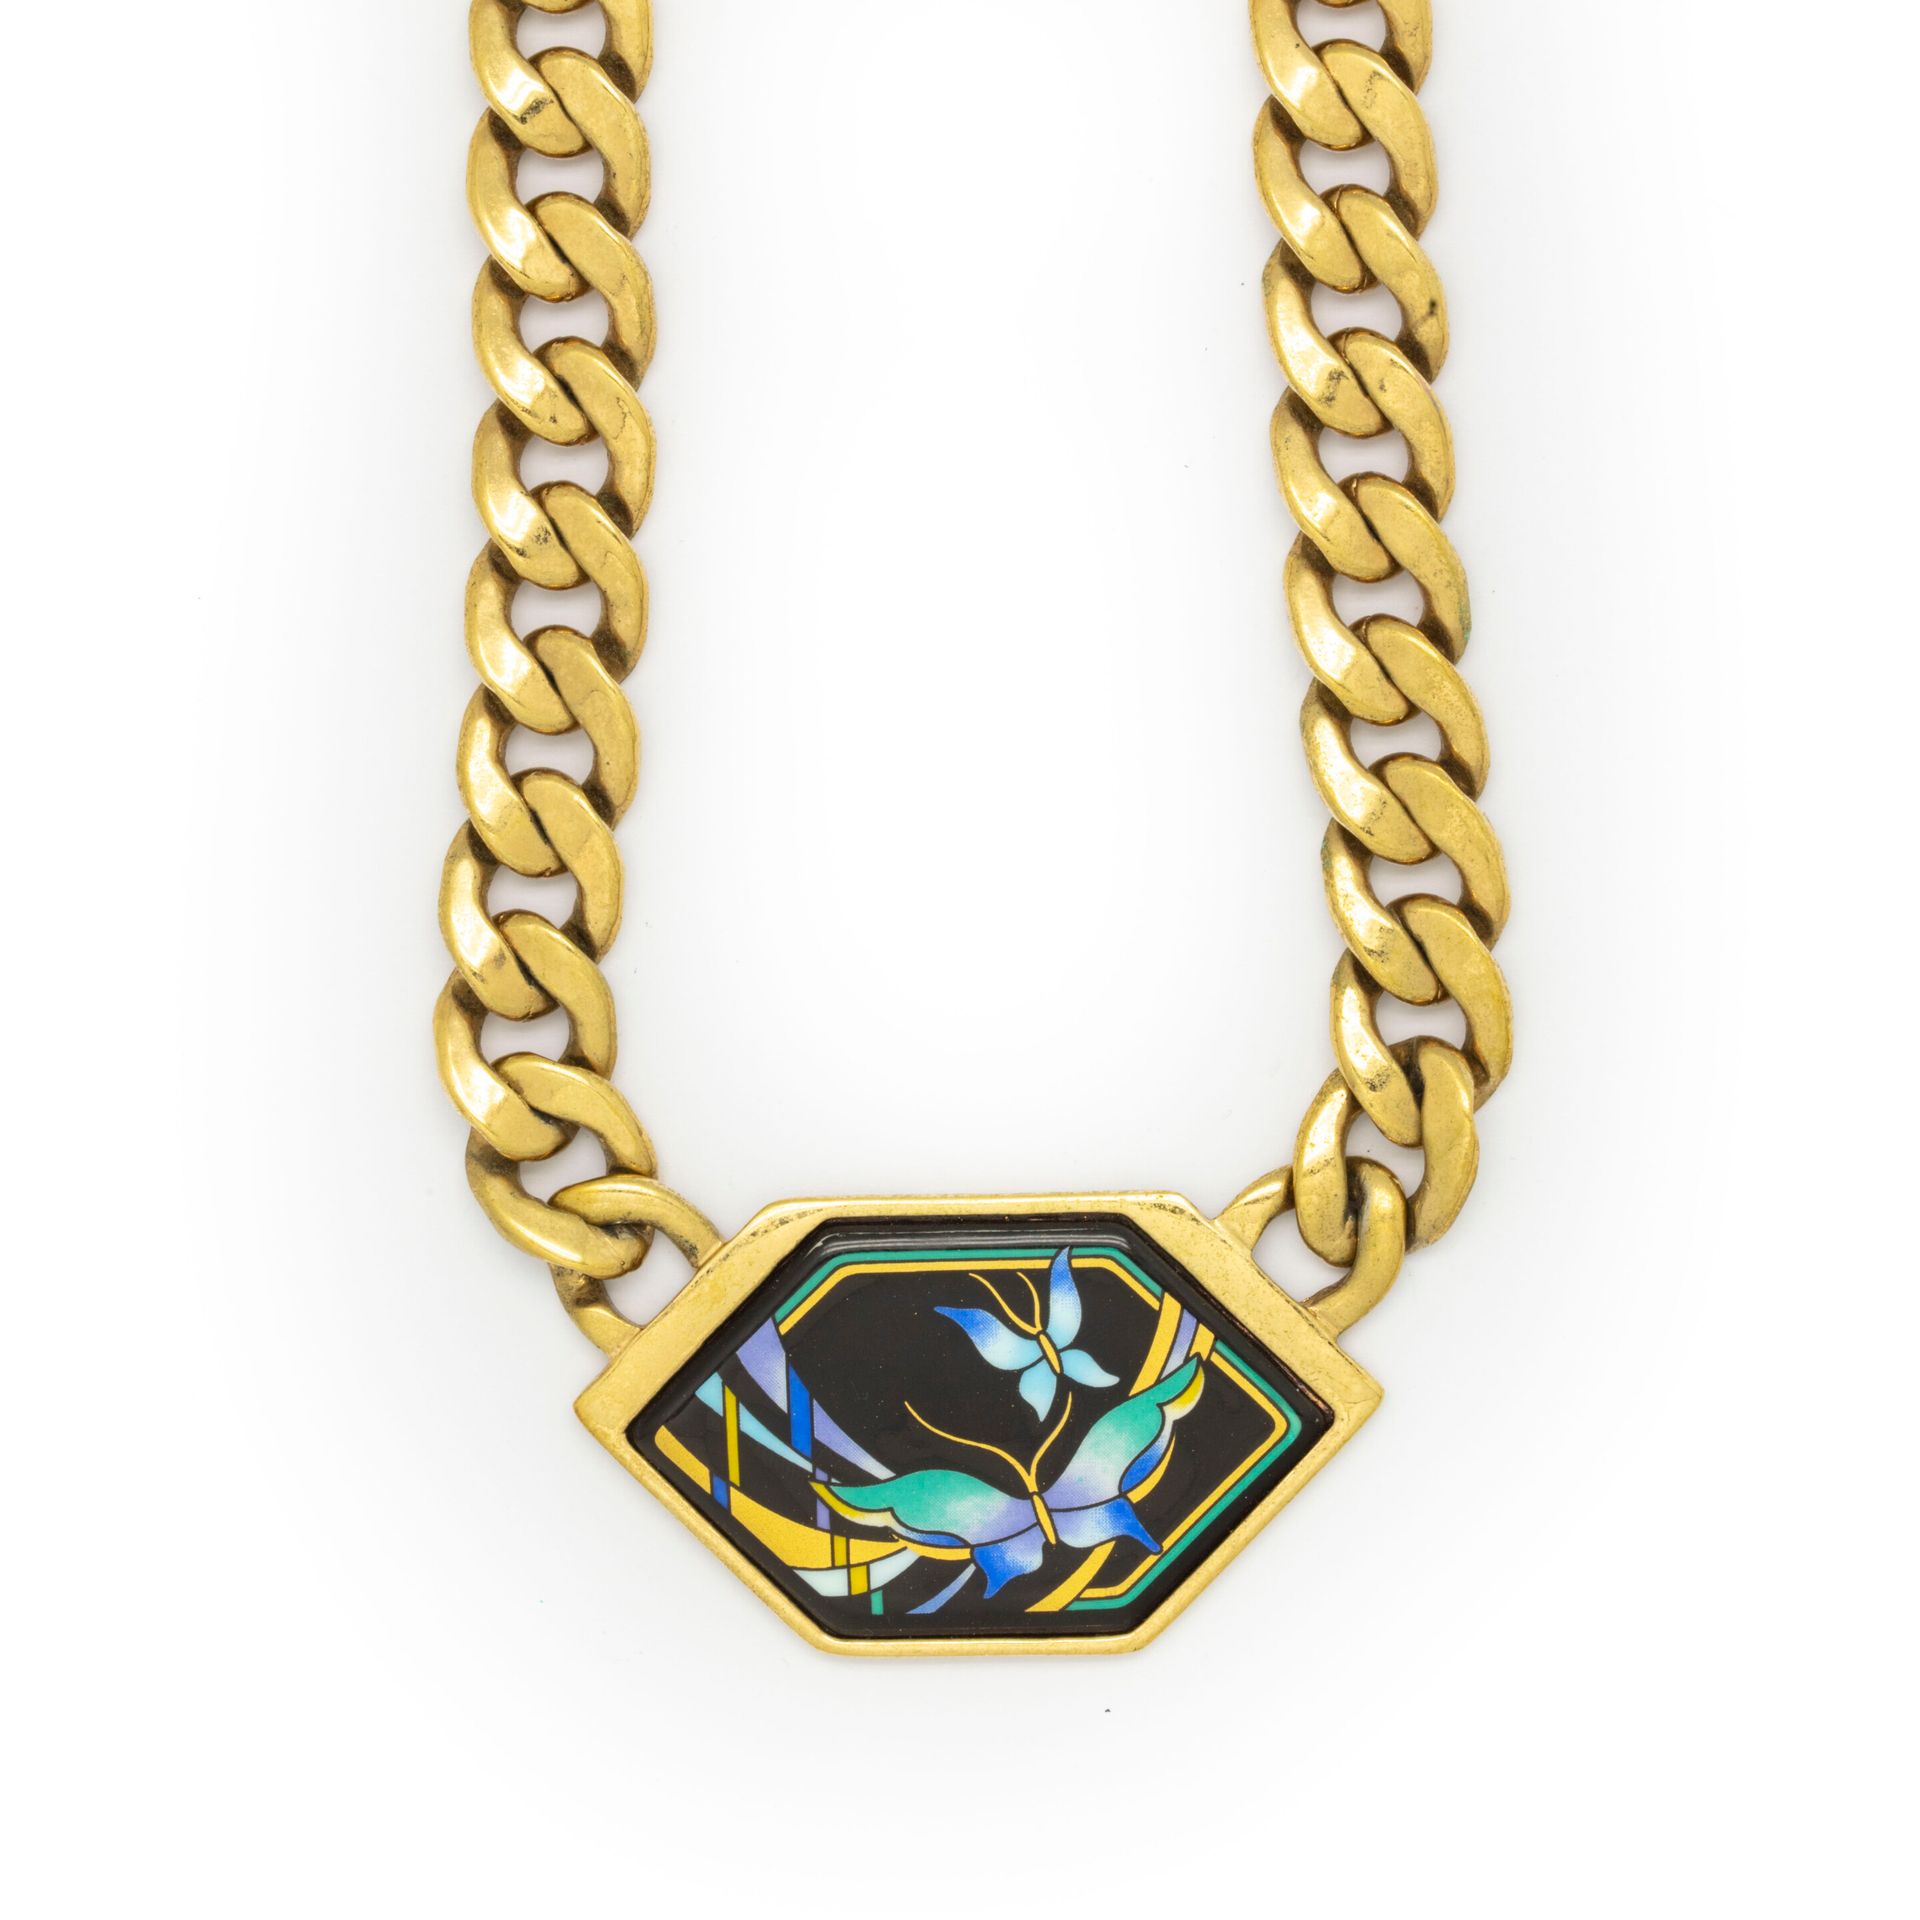 Null Michaela FREY TEAM

Necklace in gilded metal decorated with an enamel plate&hellip;